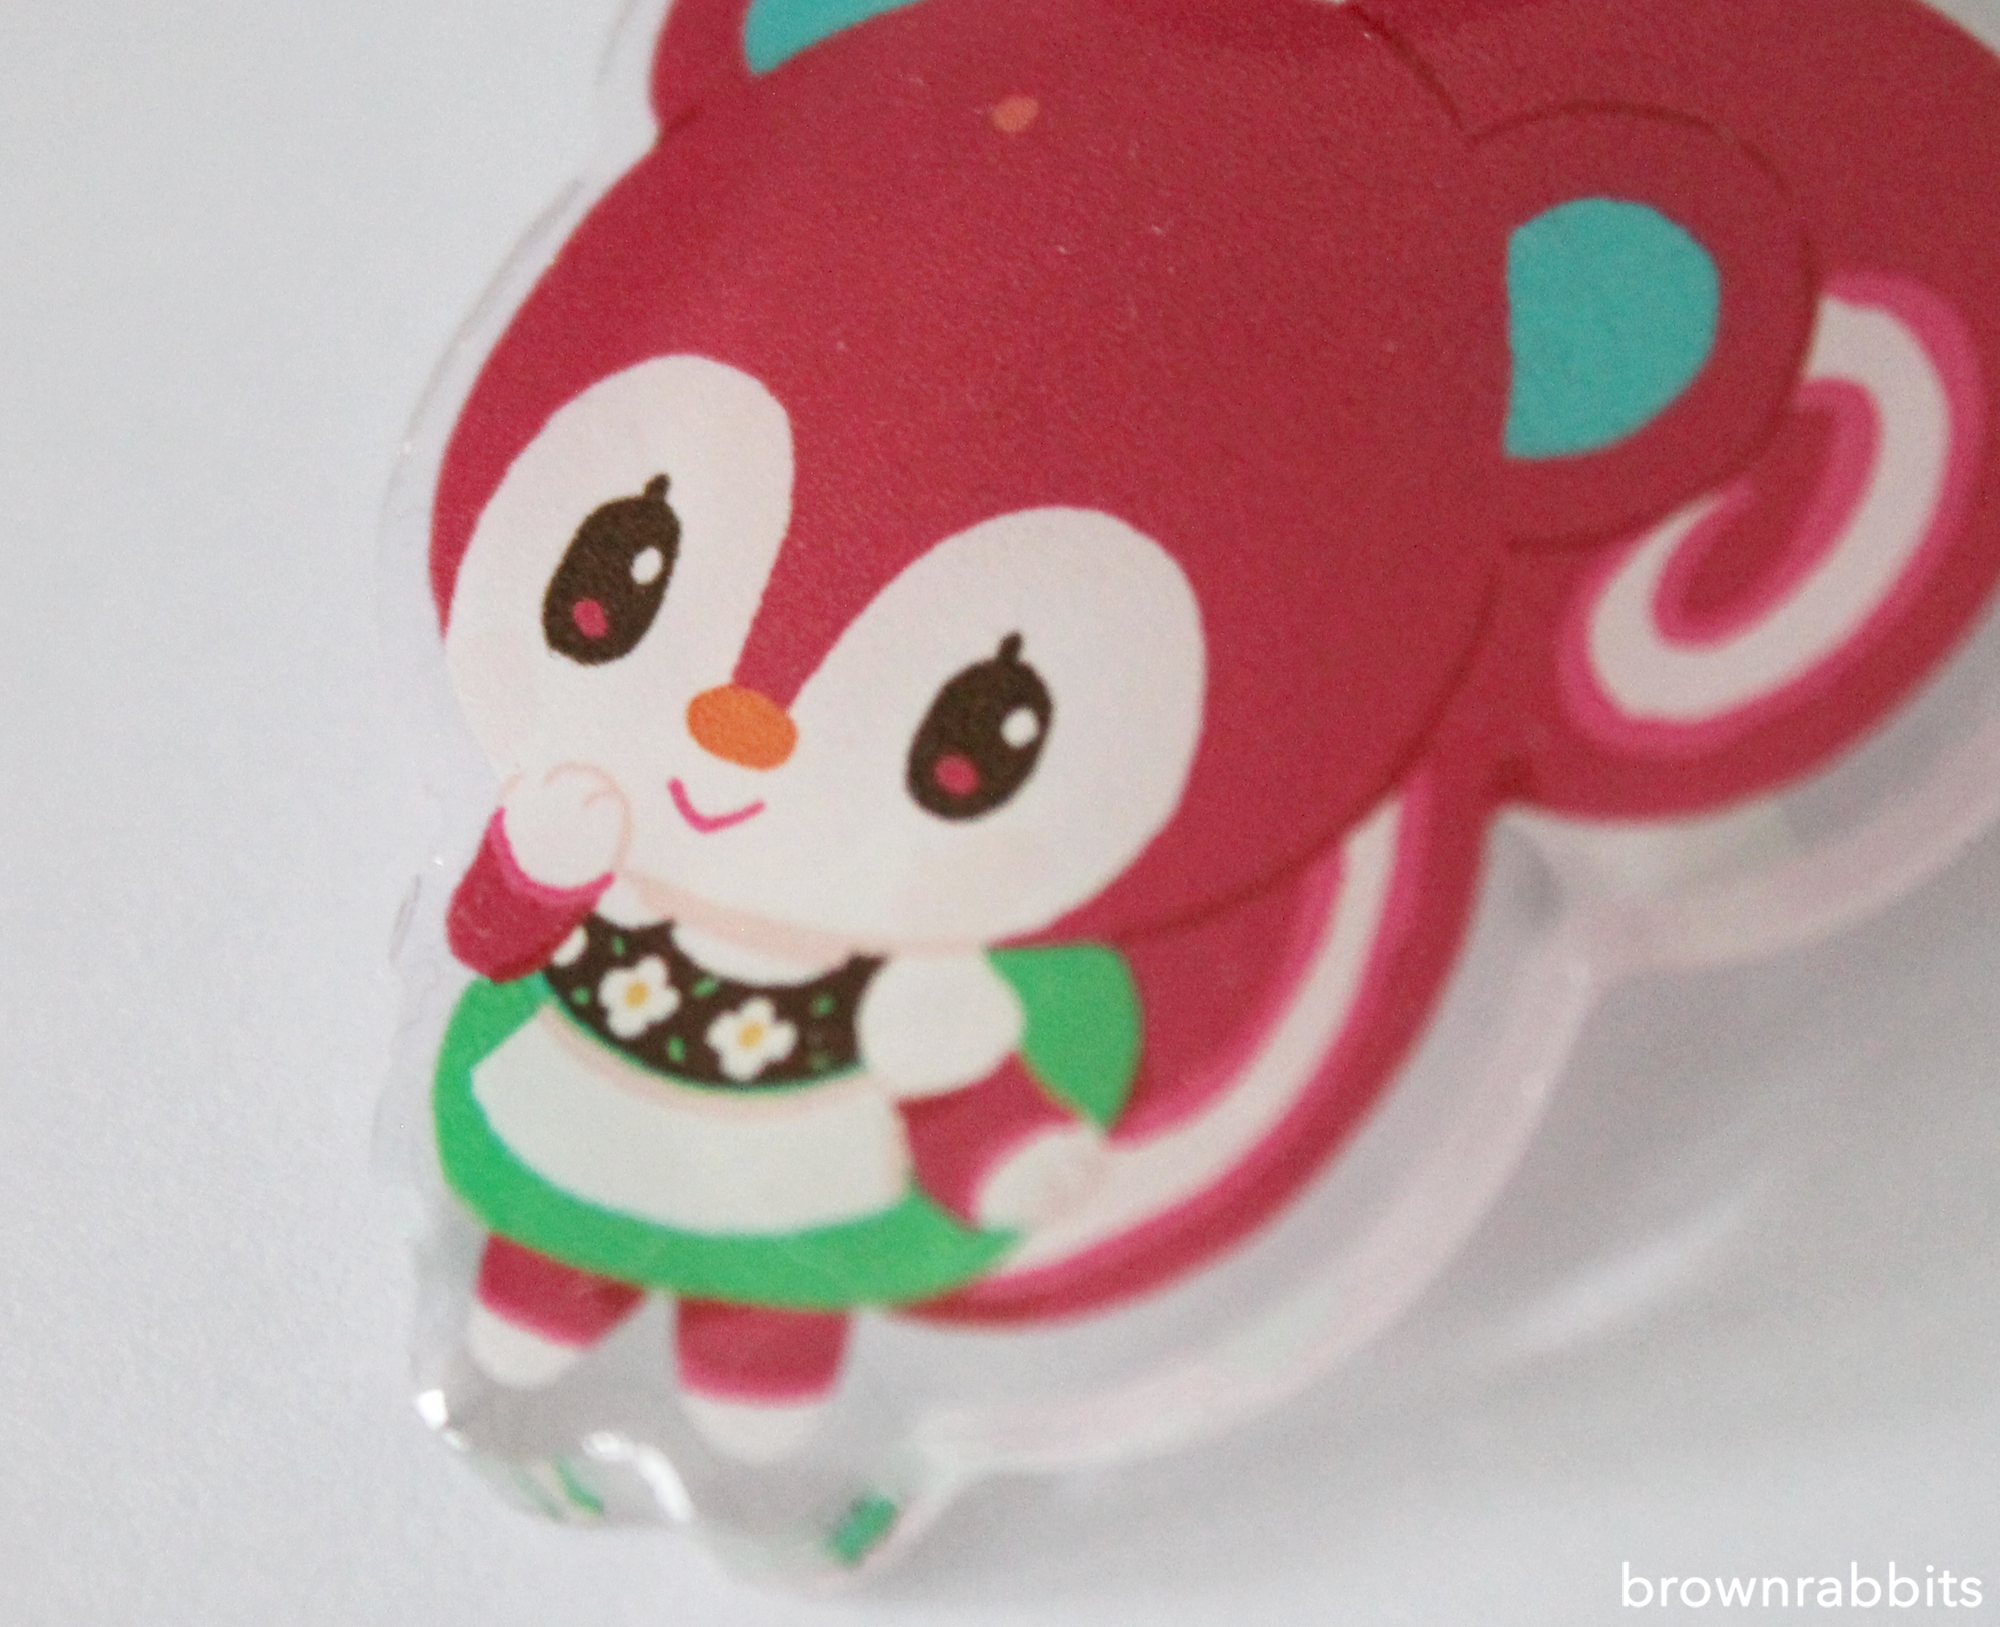 Animal Crossing Villagers and Characters Epoxy Acrylic Keychain Charm Dom